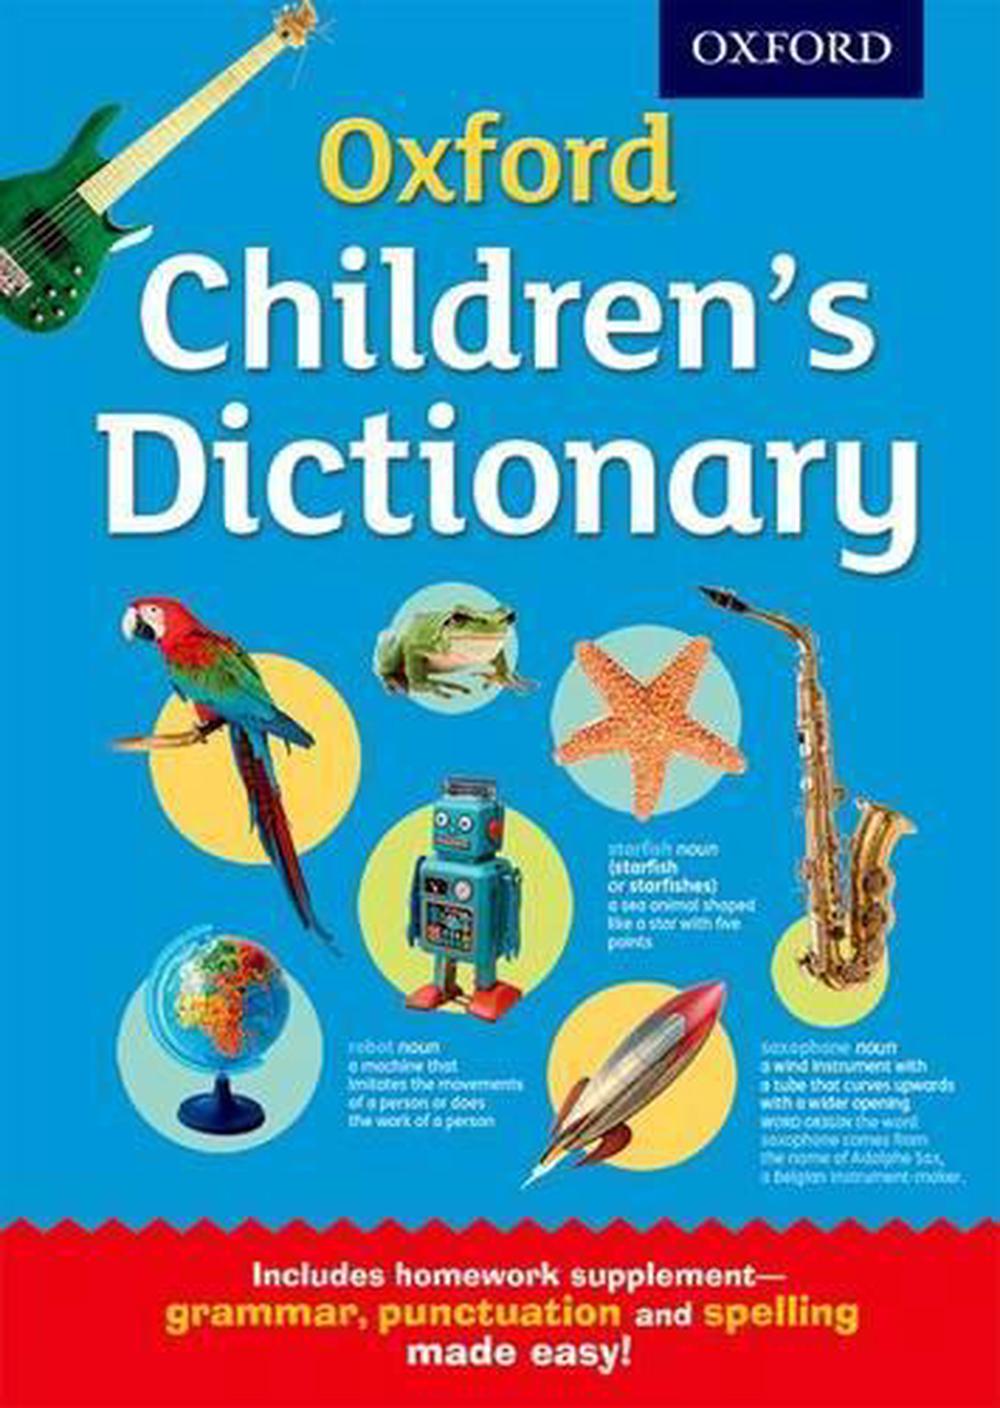 Oxford Children's Dictionary by Oxford Dictionaries, Book